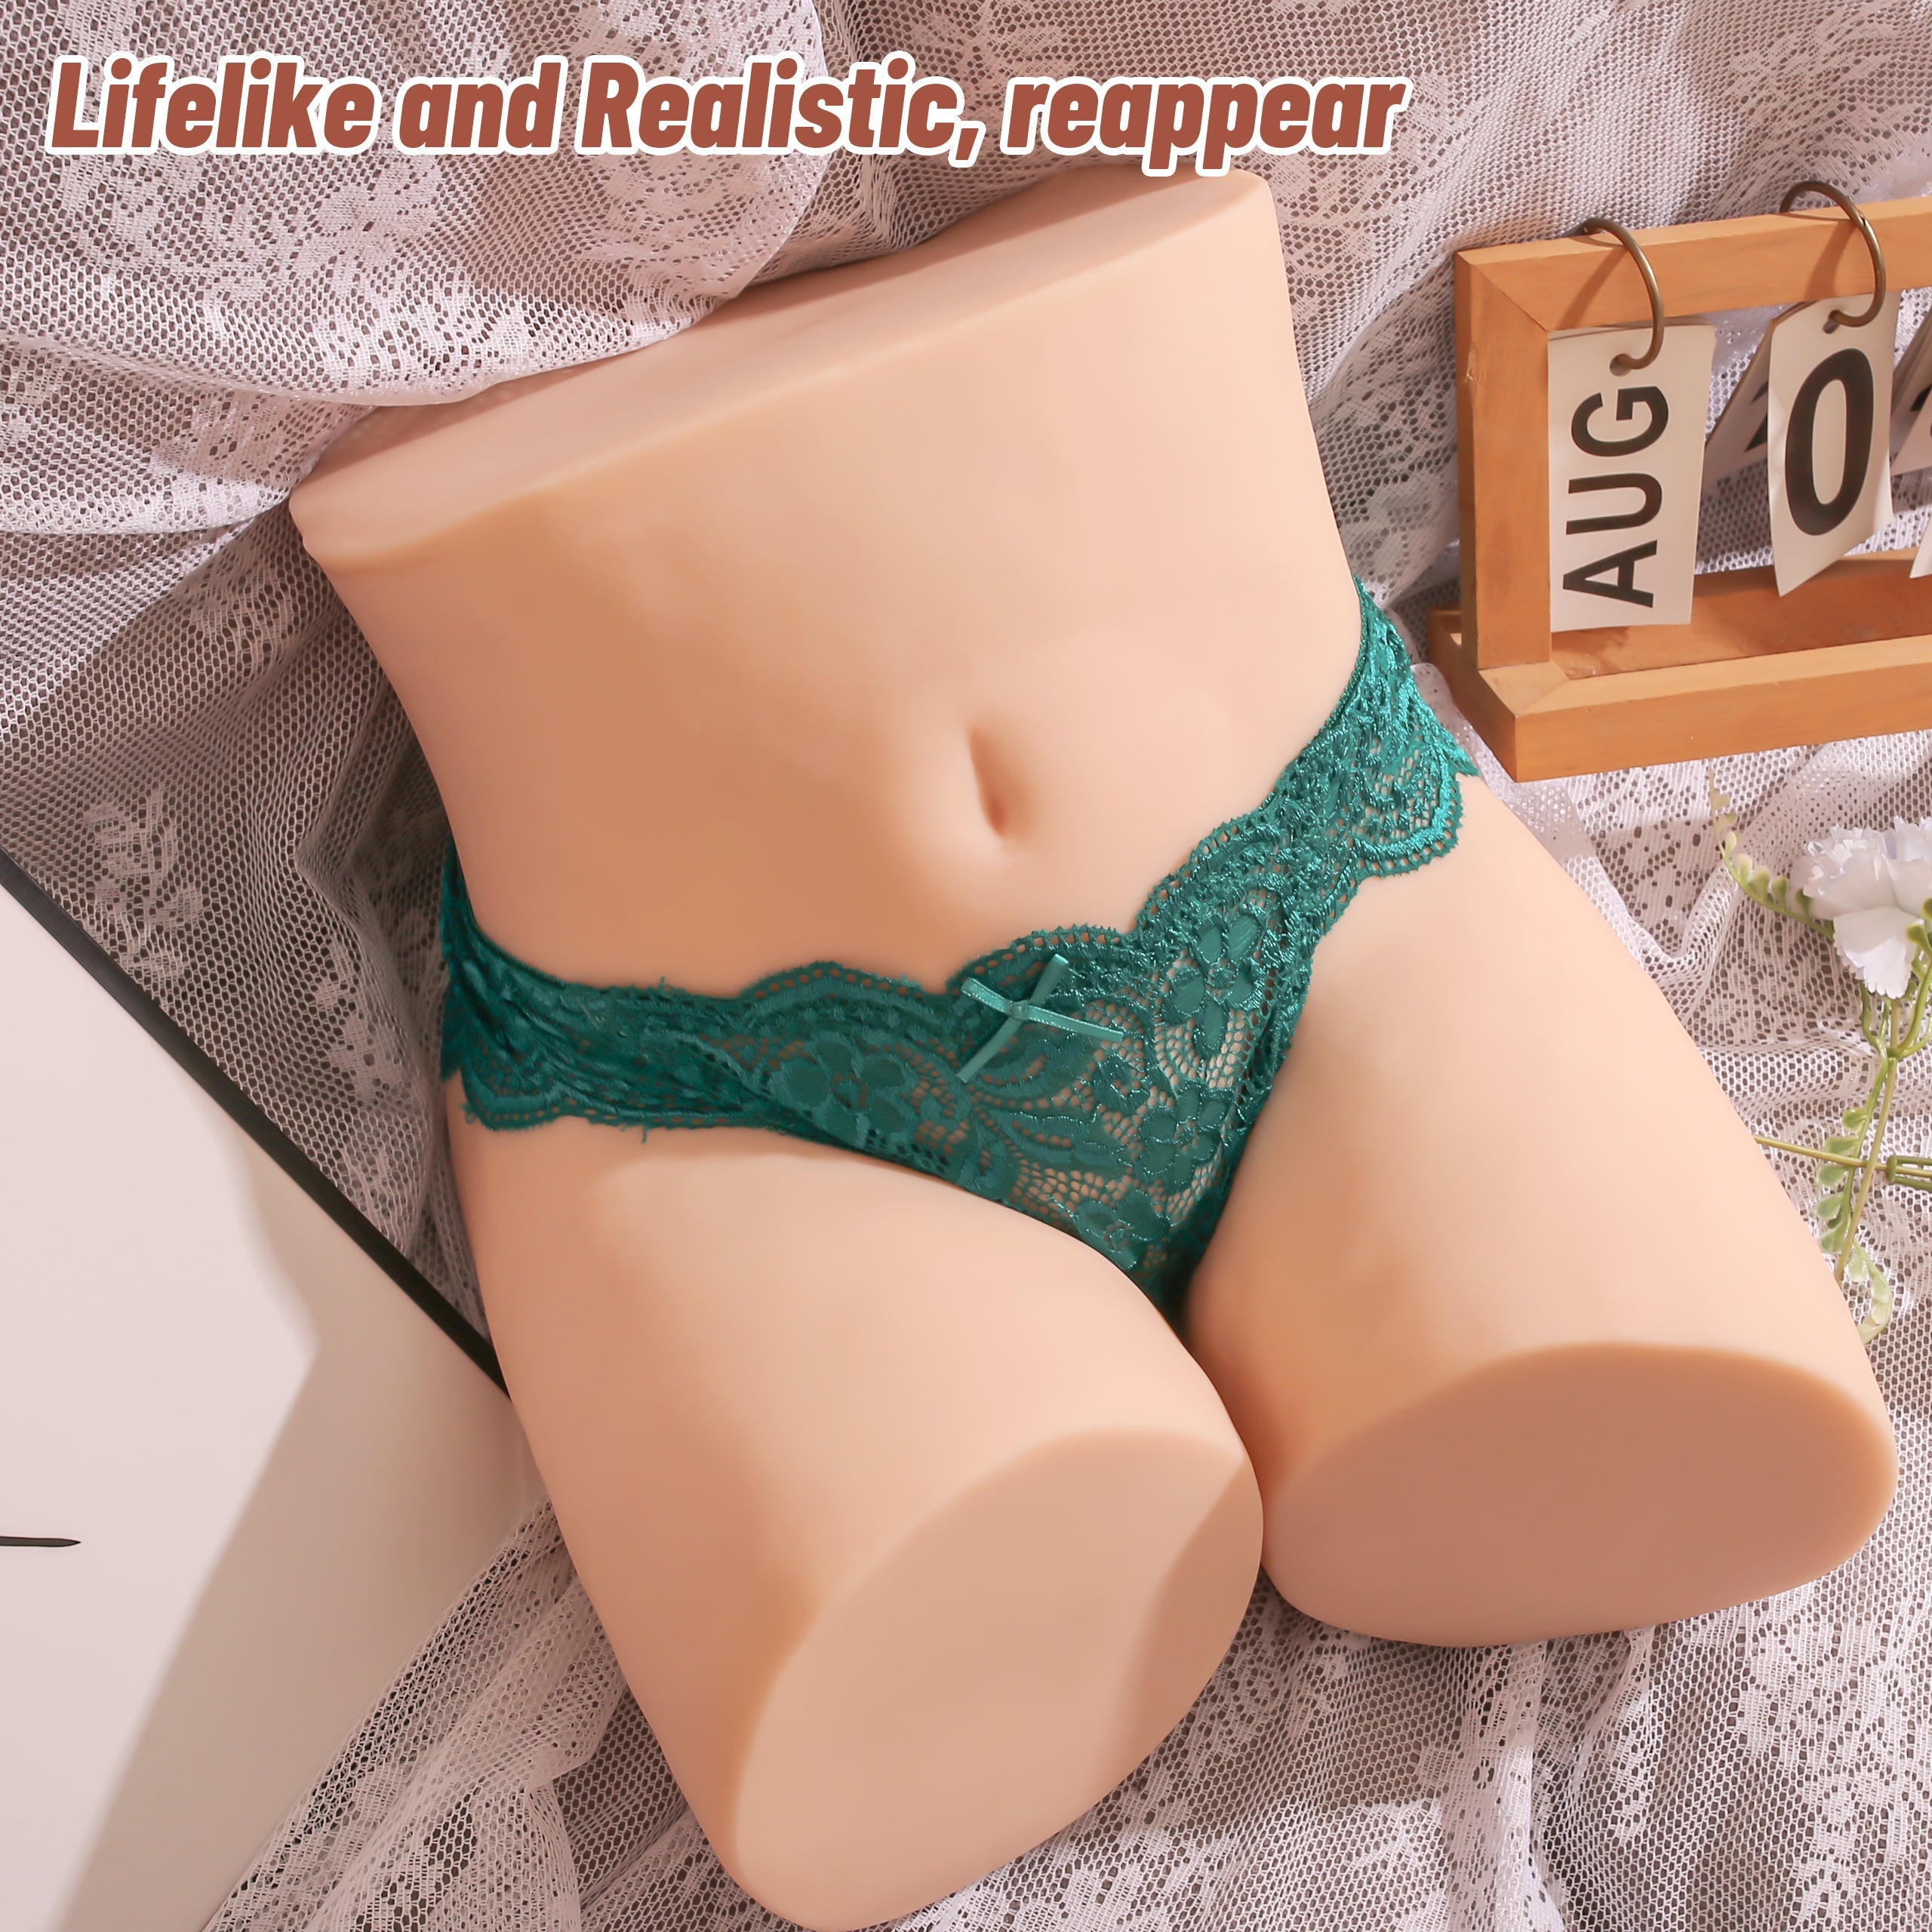  Male Masturbator Sex Doll for Men - 52.9lb Realistic Female  Torso, Boobs, Vagina, Anal 3 in 1, Life-Sized Love Doll with Built-in  Spine, Anus, Pussy, Ass, Adult Toy for Masturbation 